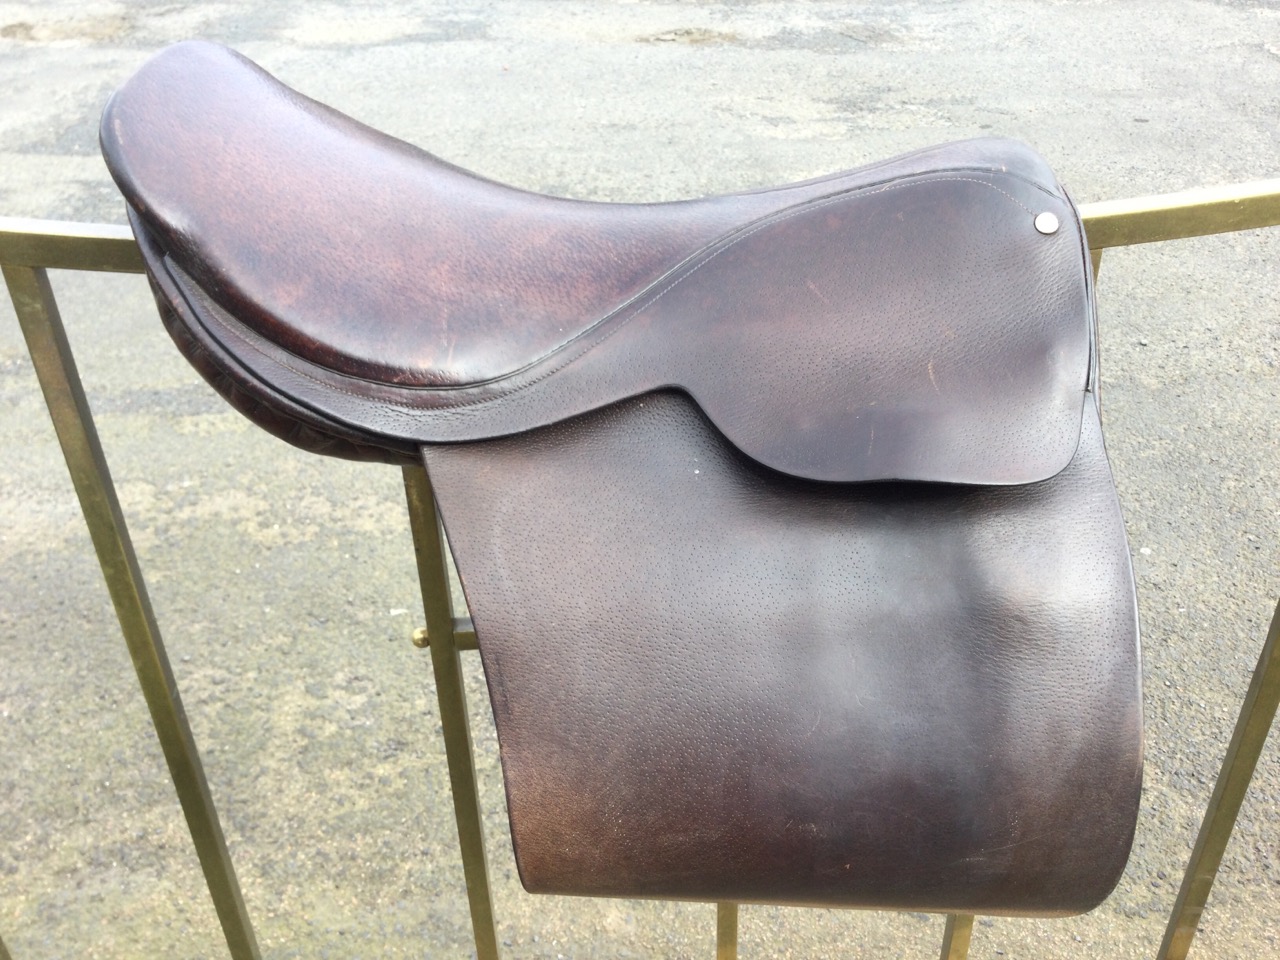 A general purpose leather saddle with forged steel mounts by W Brooke & Son Ltd.